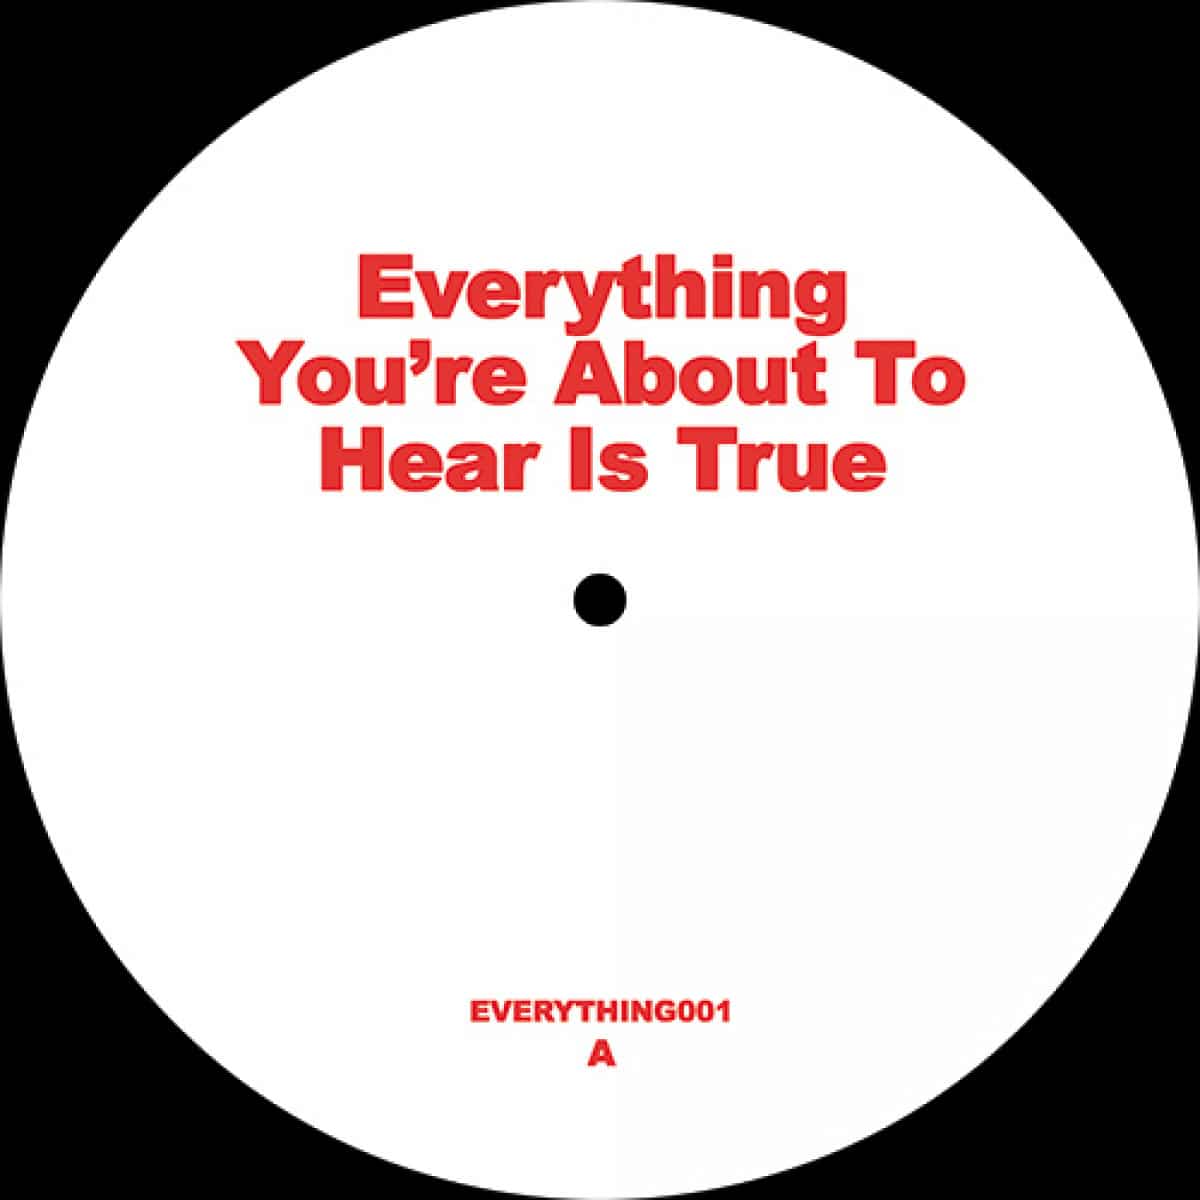 Unknown Artist - Everything Youre About to Hear Is True EP - EVERYTHING001 - EVERYTHING YOURE ABOUT TO HEAR IS TRUE